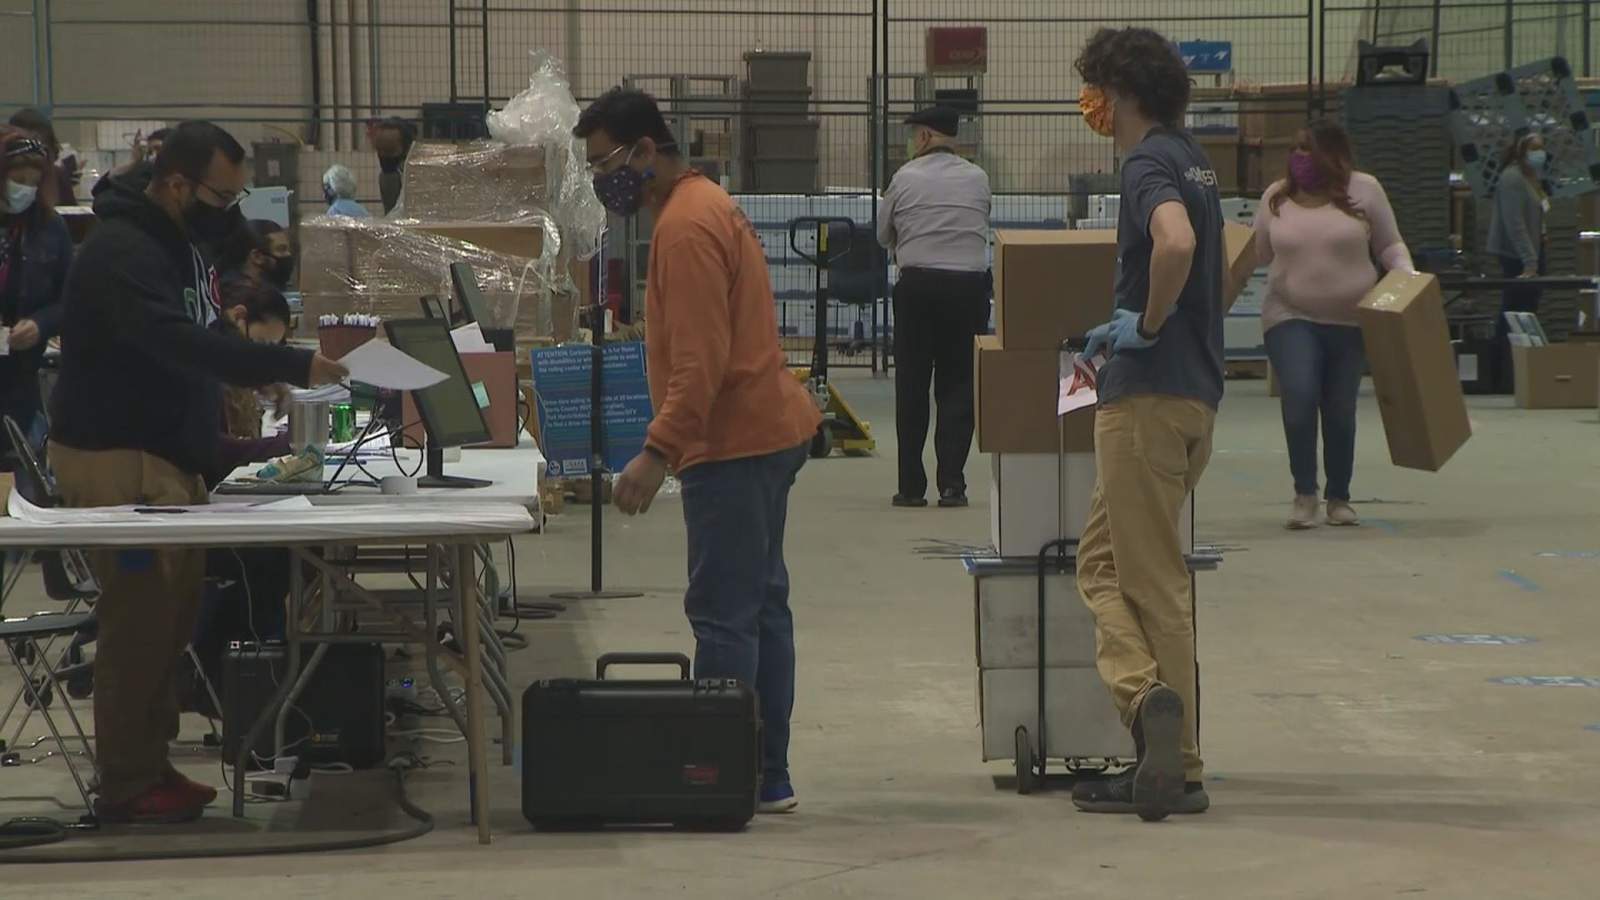 Harris County makes final preparations for Election Day